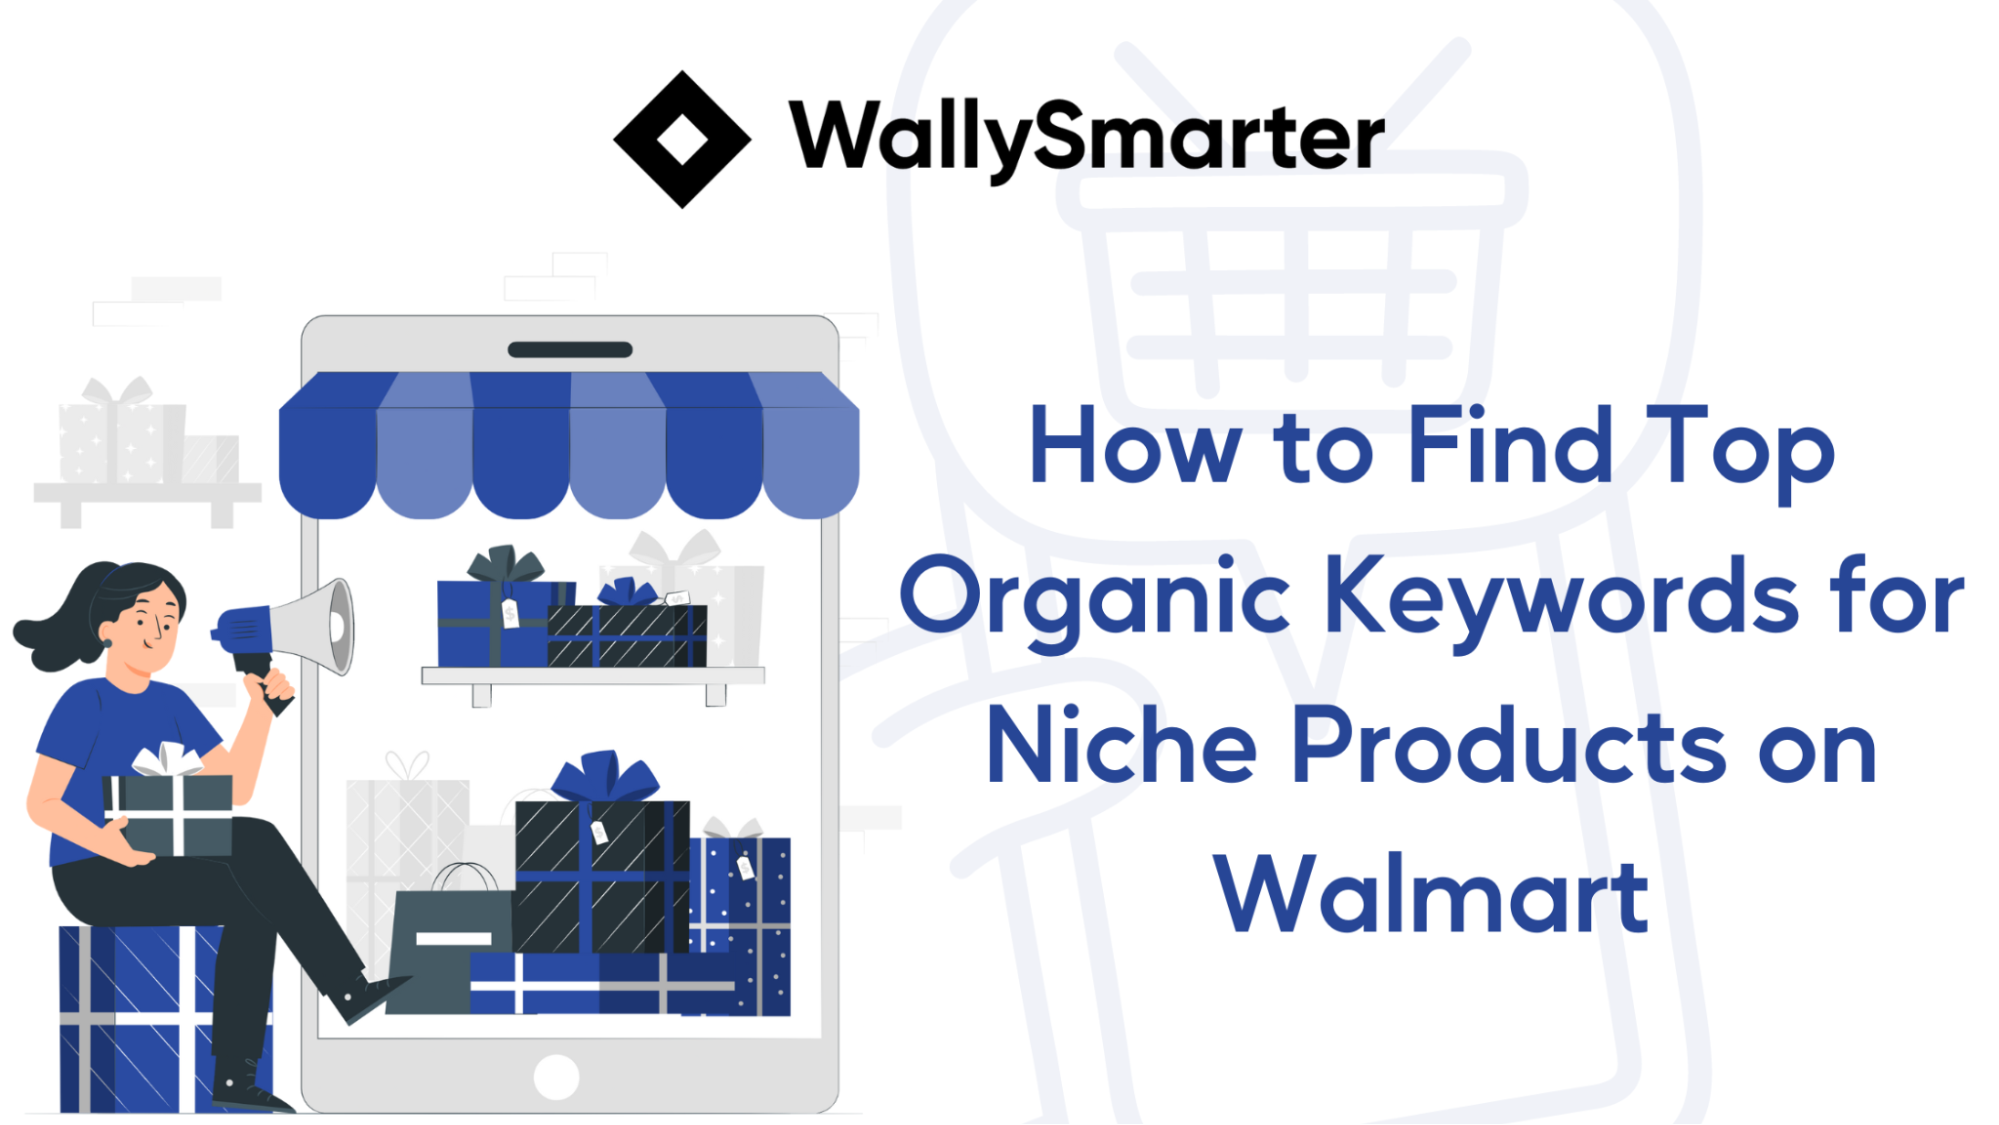 How to Find Top Organic Keywords for Niche Products on Walmart